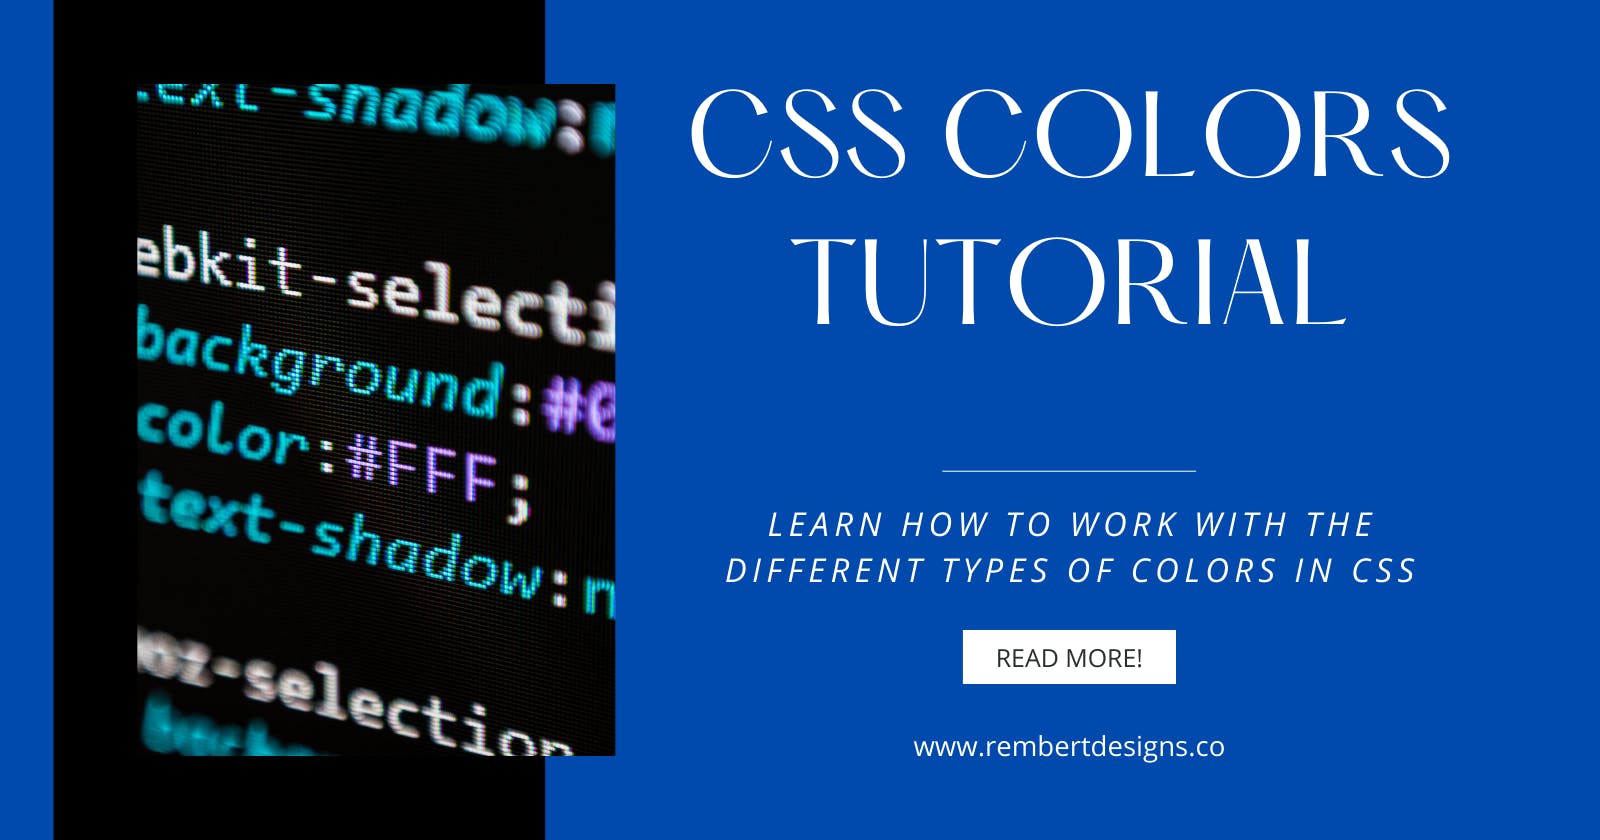 CSS Colors Tutorial